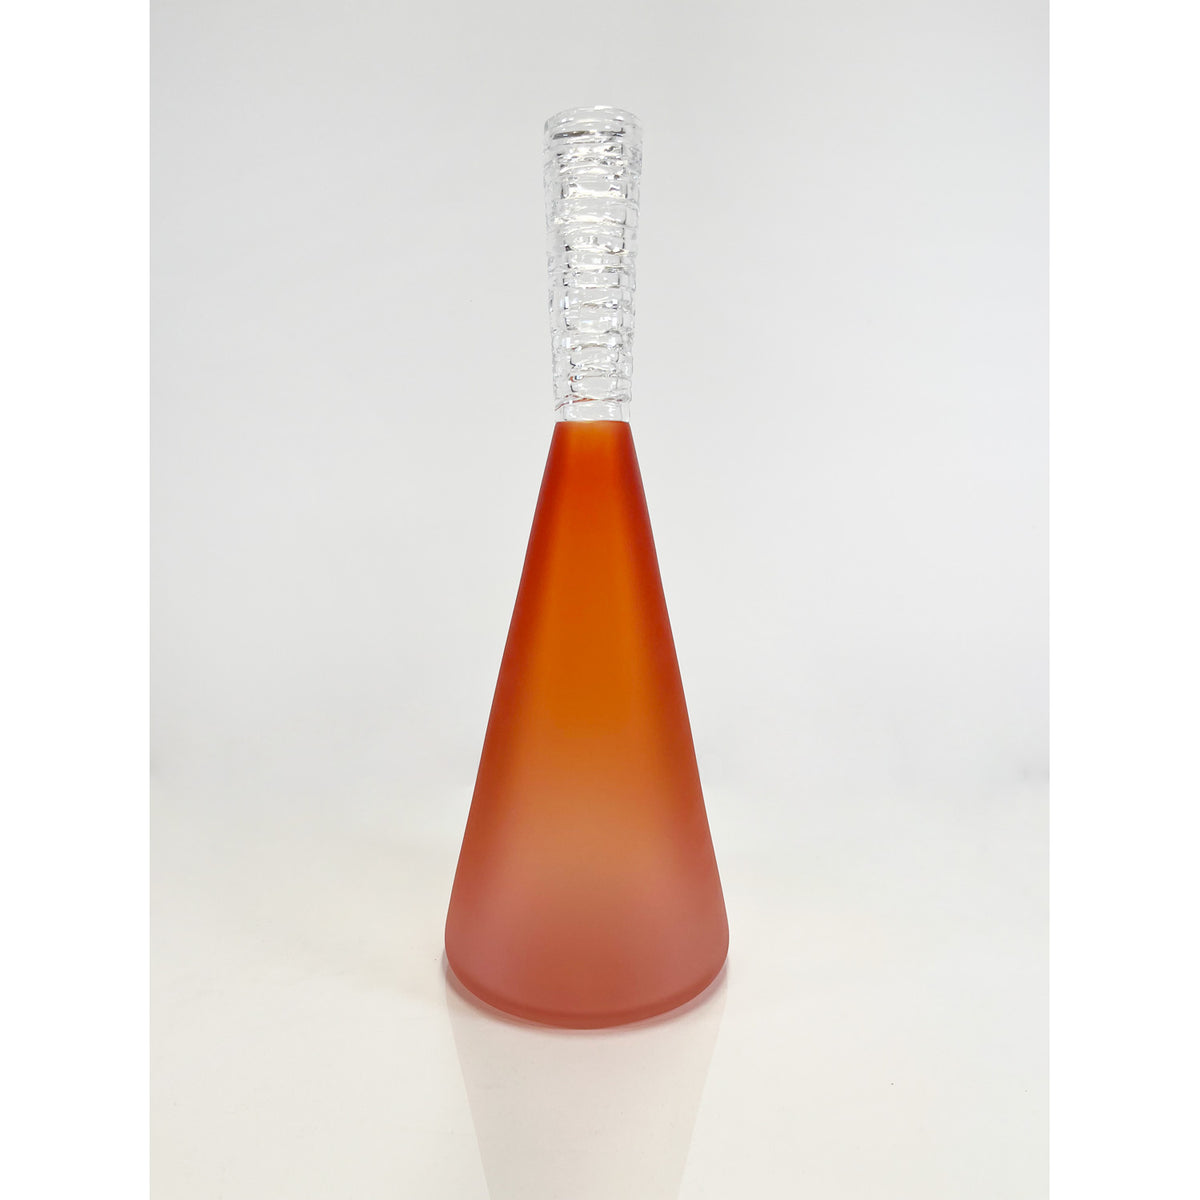 Jaan Andres - Potions Rose Cone, 19" x 6" x 6"